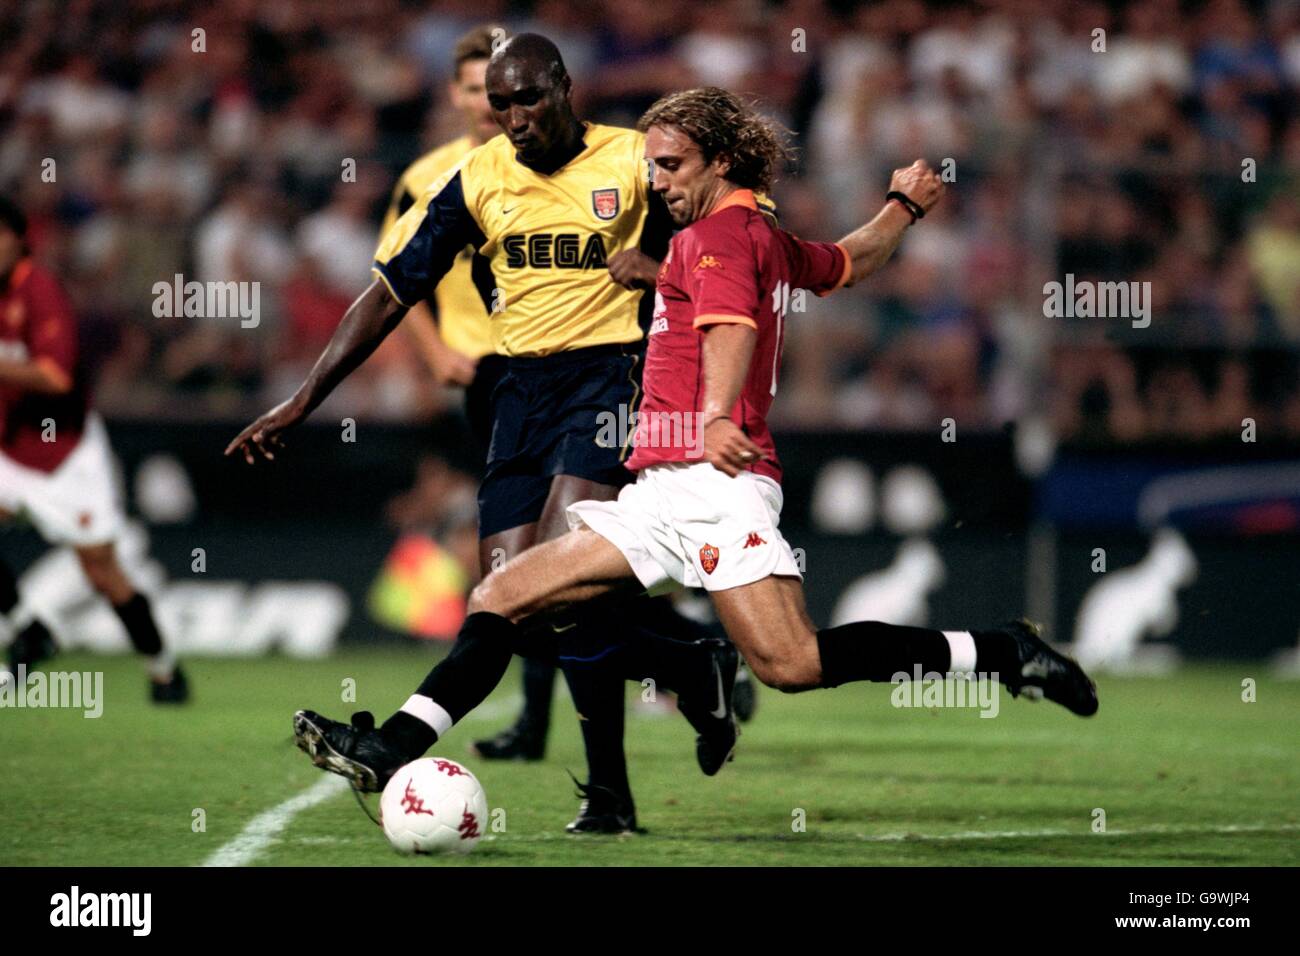 Soccer - Friendly - AS Roma v Arsenal. Arsenal's Sol Campbell tries to block a shot from Roma's Gabriel Batistuta Stock Photo